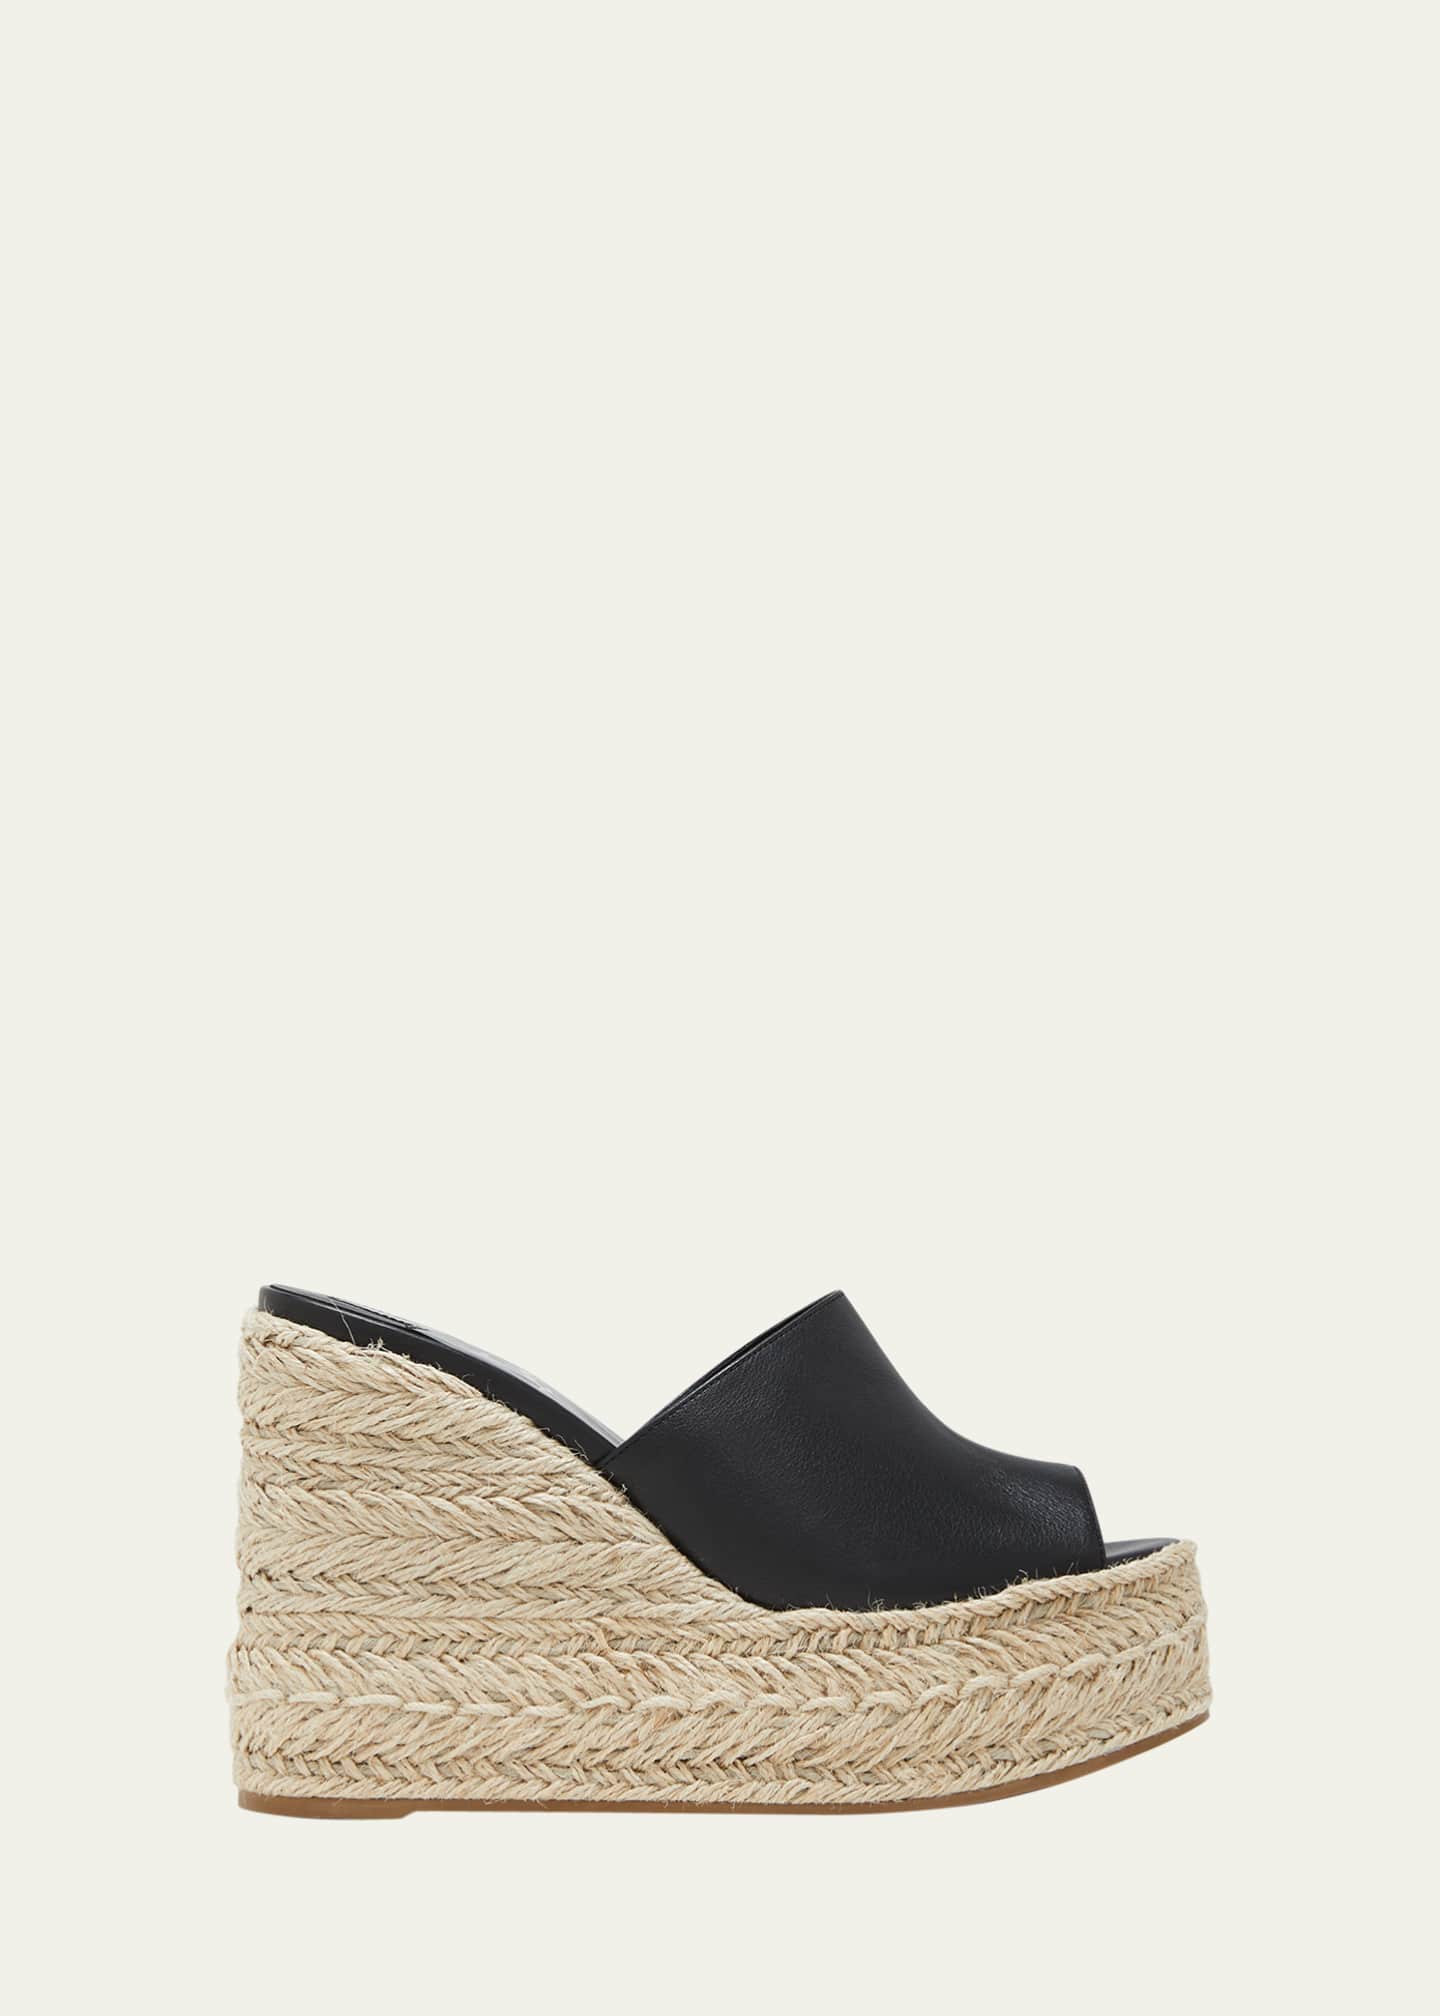 Christian Louboutin Ariella Leather Red Sole Wedge Espadrilles ...